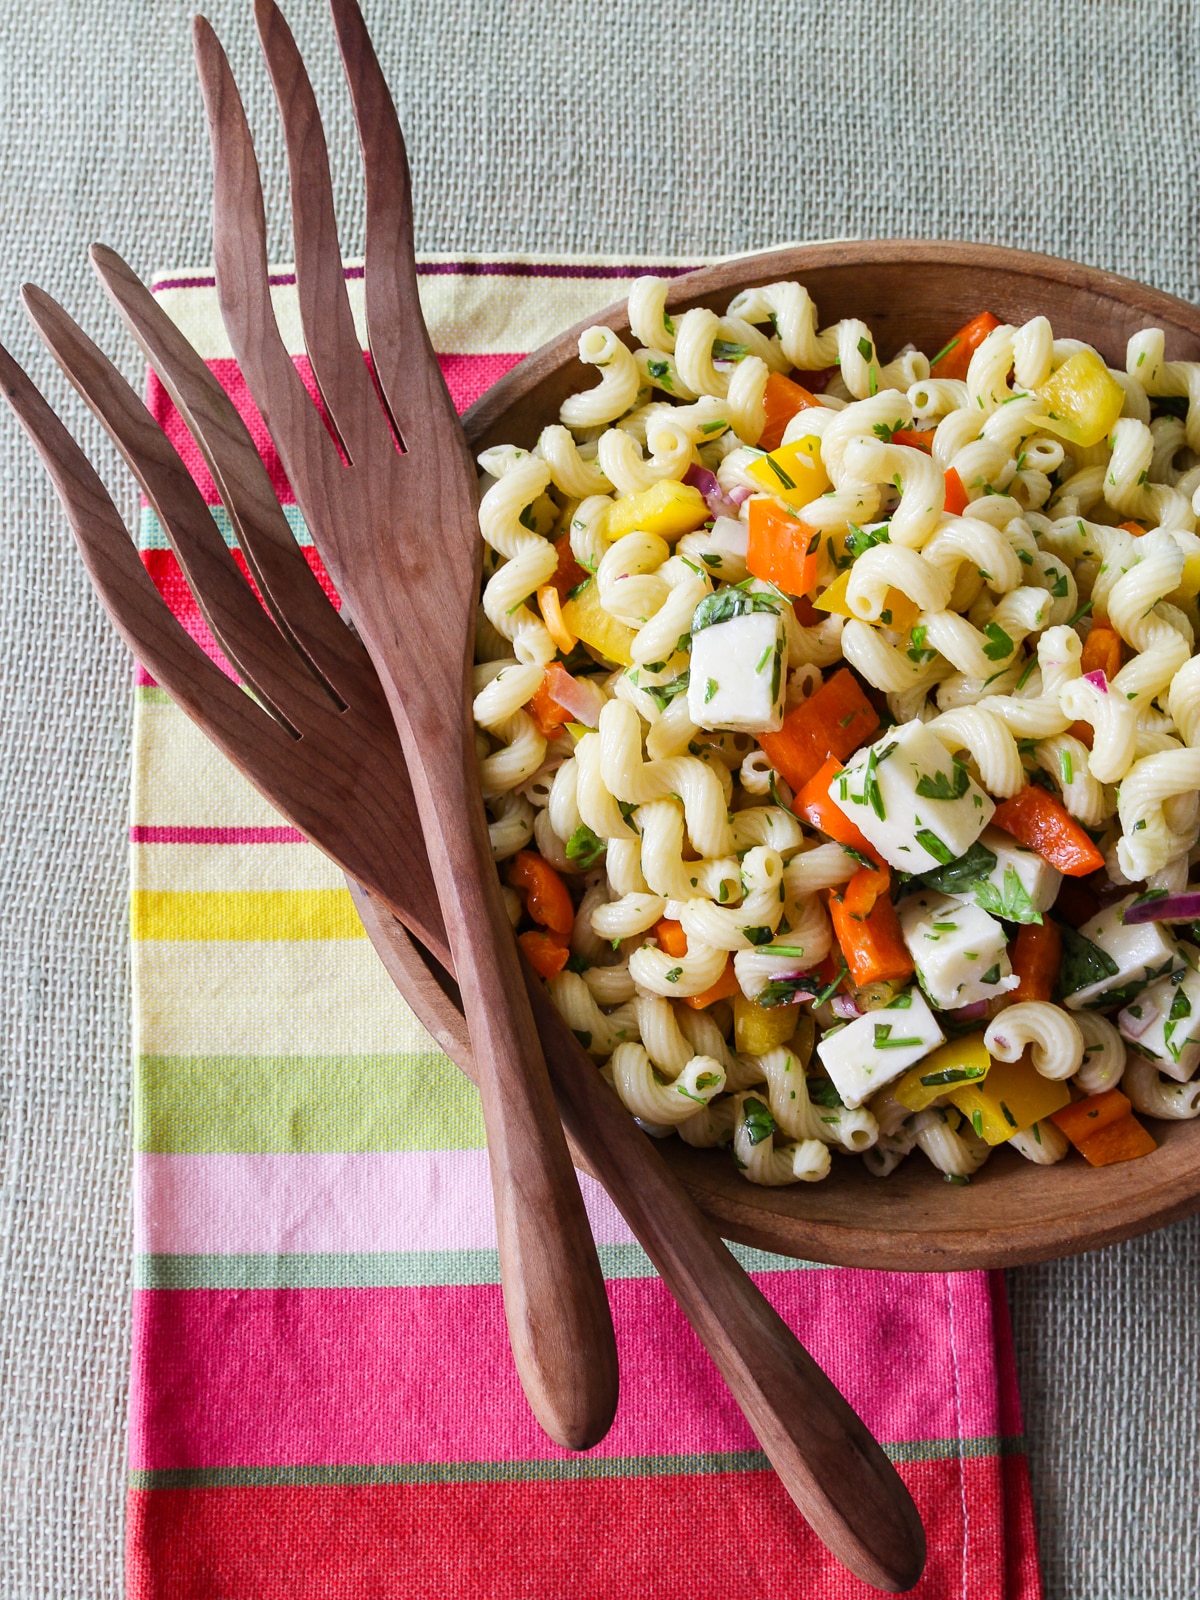 A wood bowl with pasta salad and wood tongs resting on the edge on a colorful striped towel. 